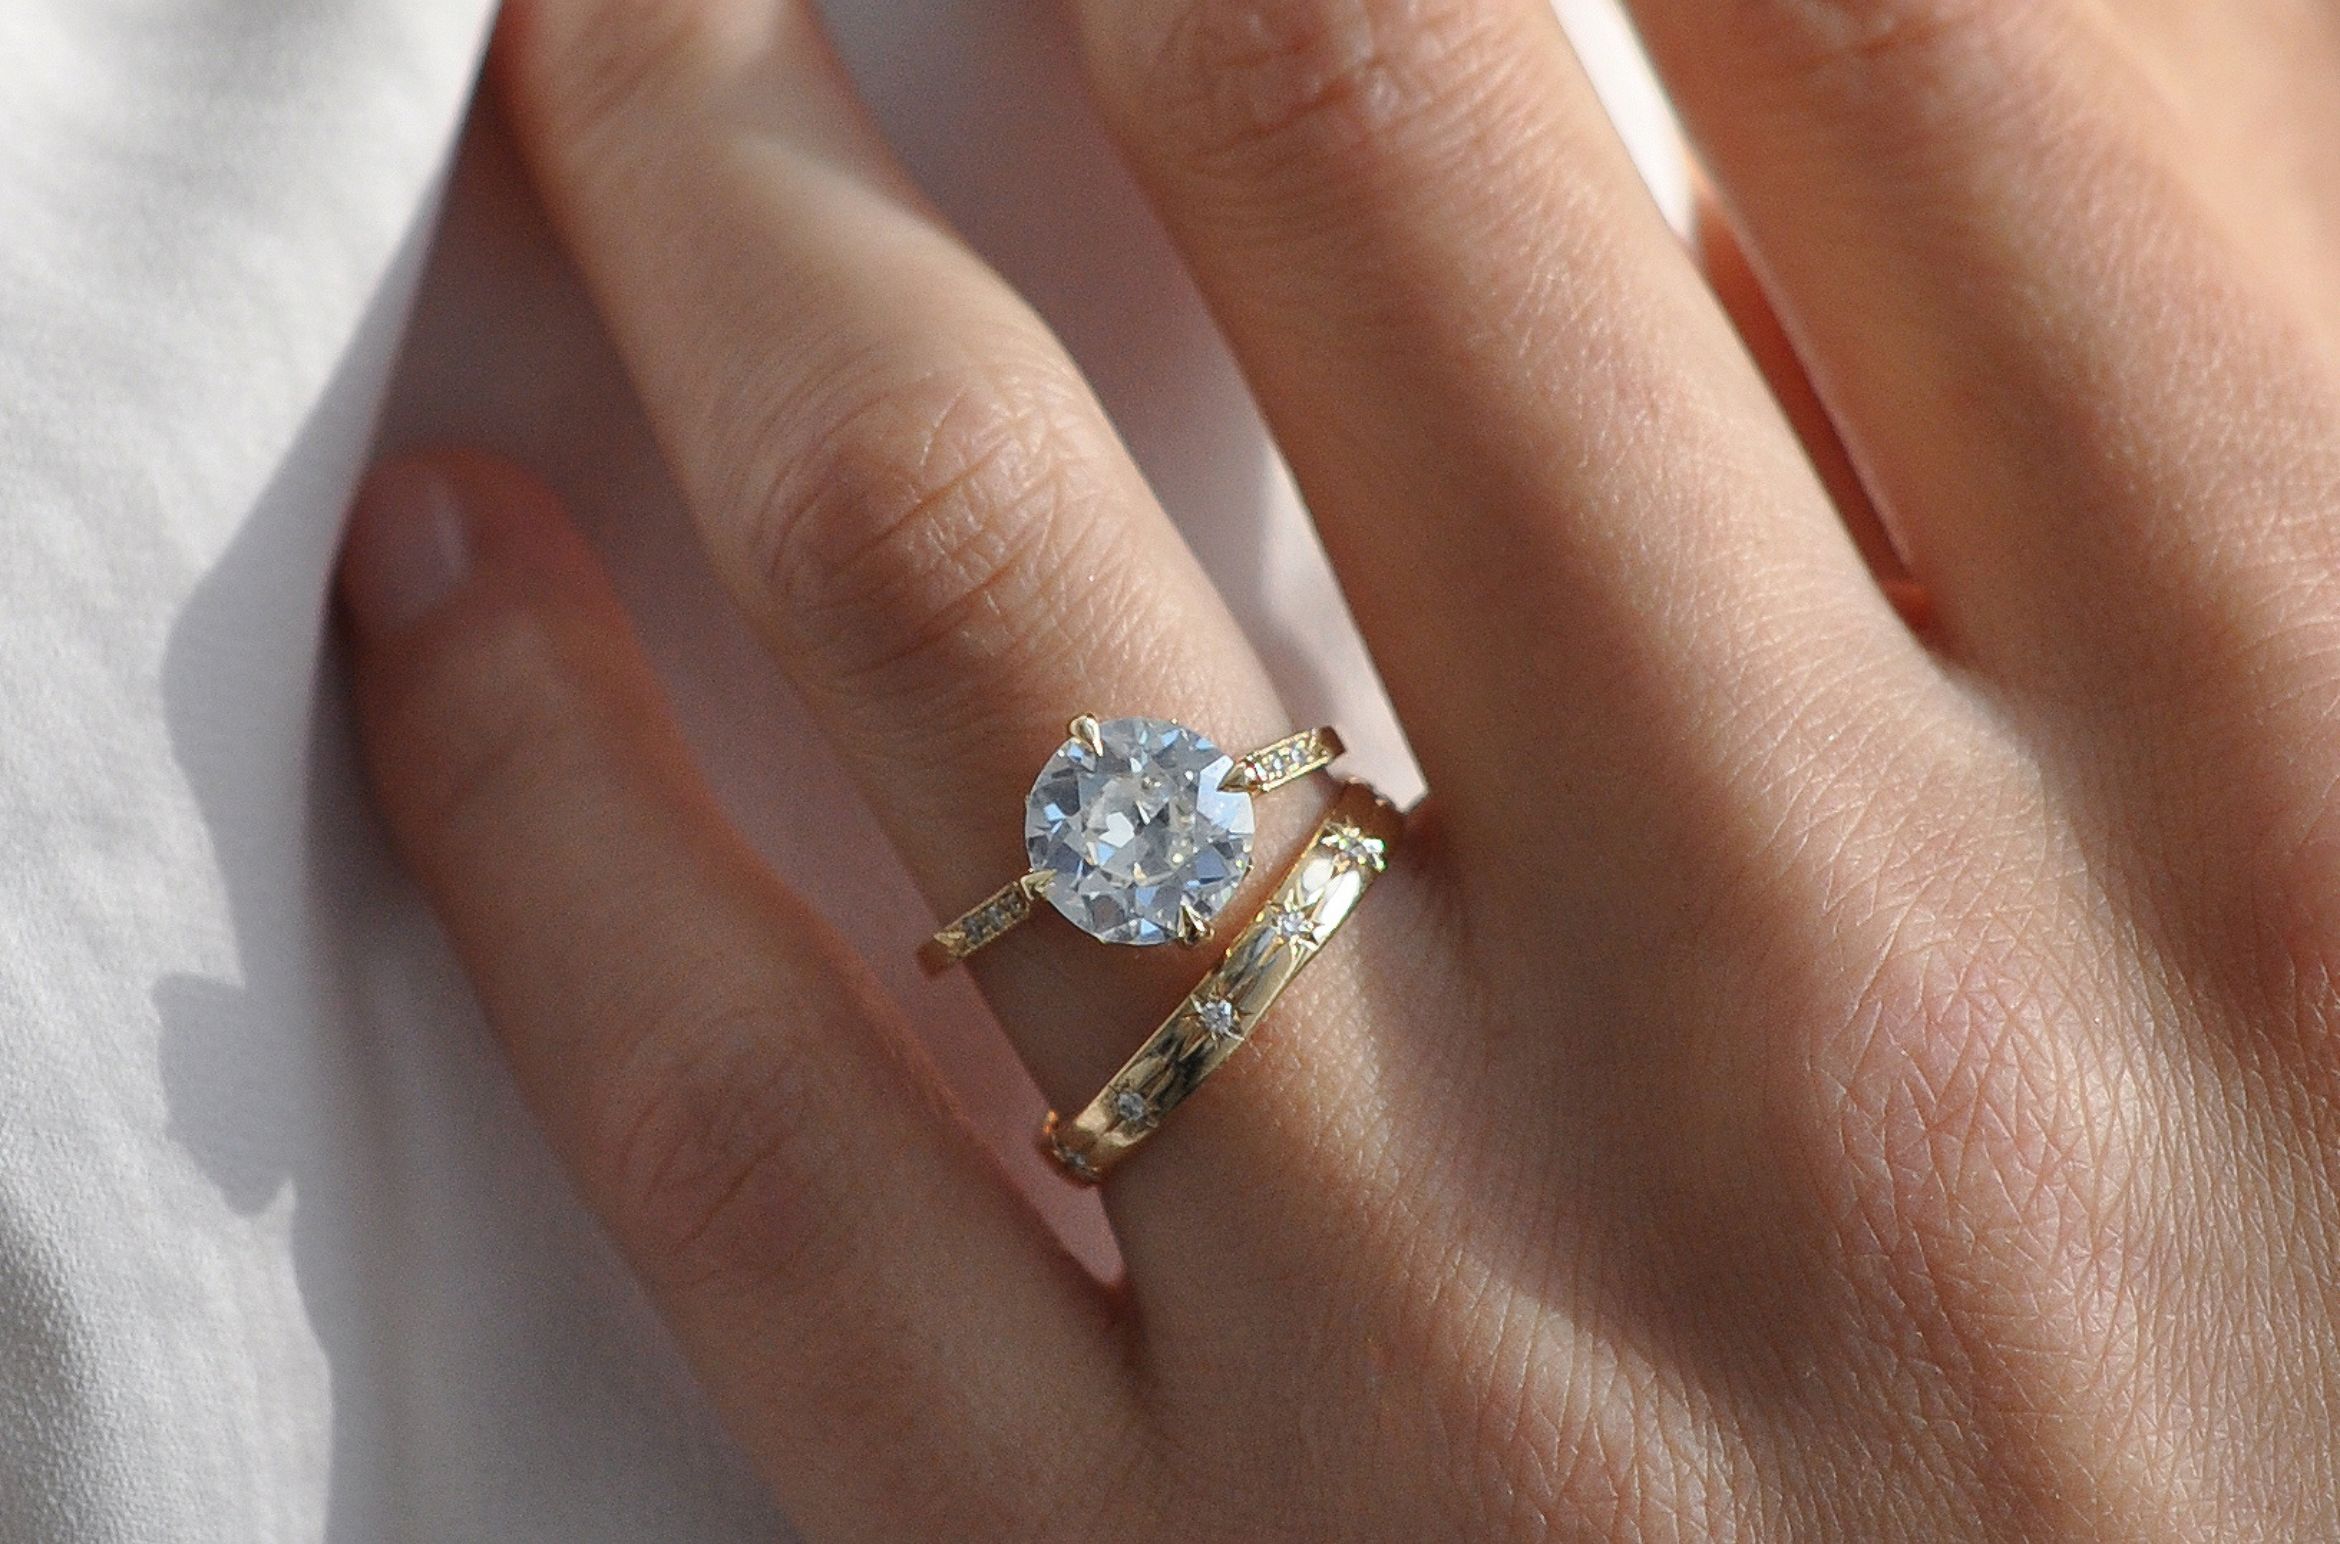 Ethical Wedding & Engagement Rings - The Natural Wedding Company